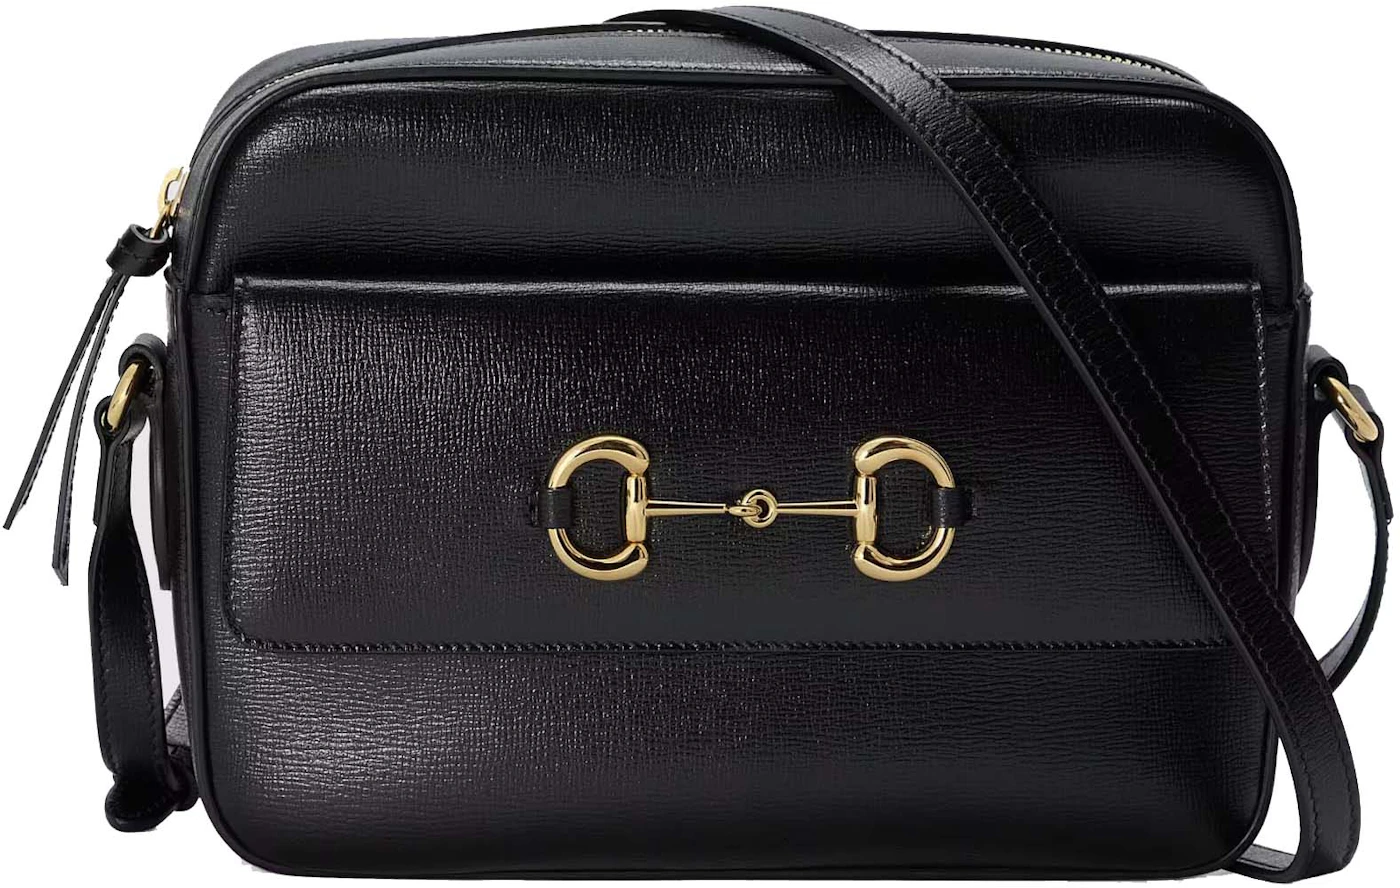 Gucci Horsebit 1955 Shoulder Bag Mini Black in Leather with Gold